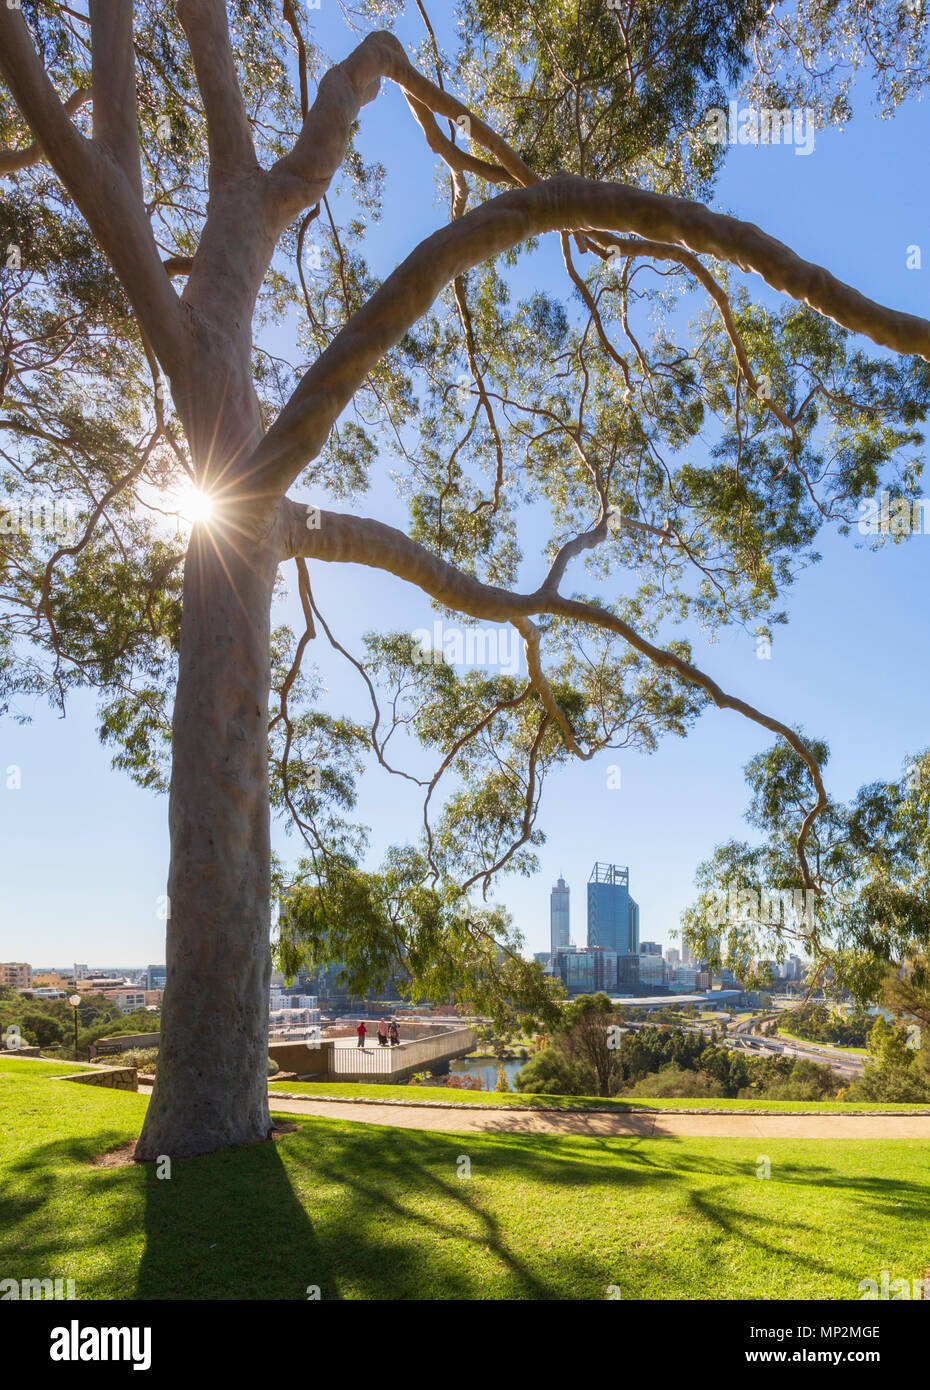 Lemon scented gum trees (Corymbia citriodora) lining Fraser Evenue in Kings Park. With Perth city and the Swan River in the distance. Perth, Australia Stock Photo